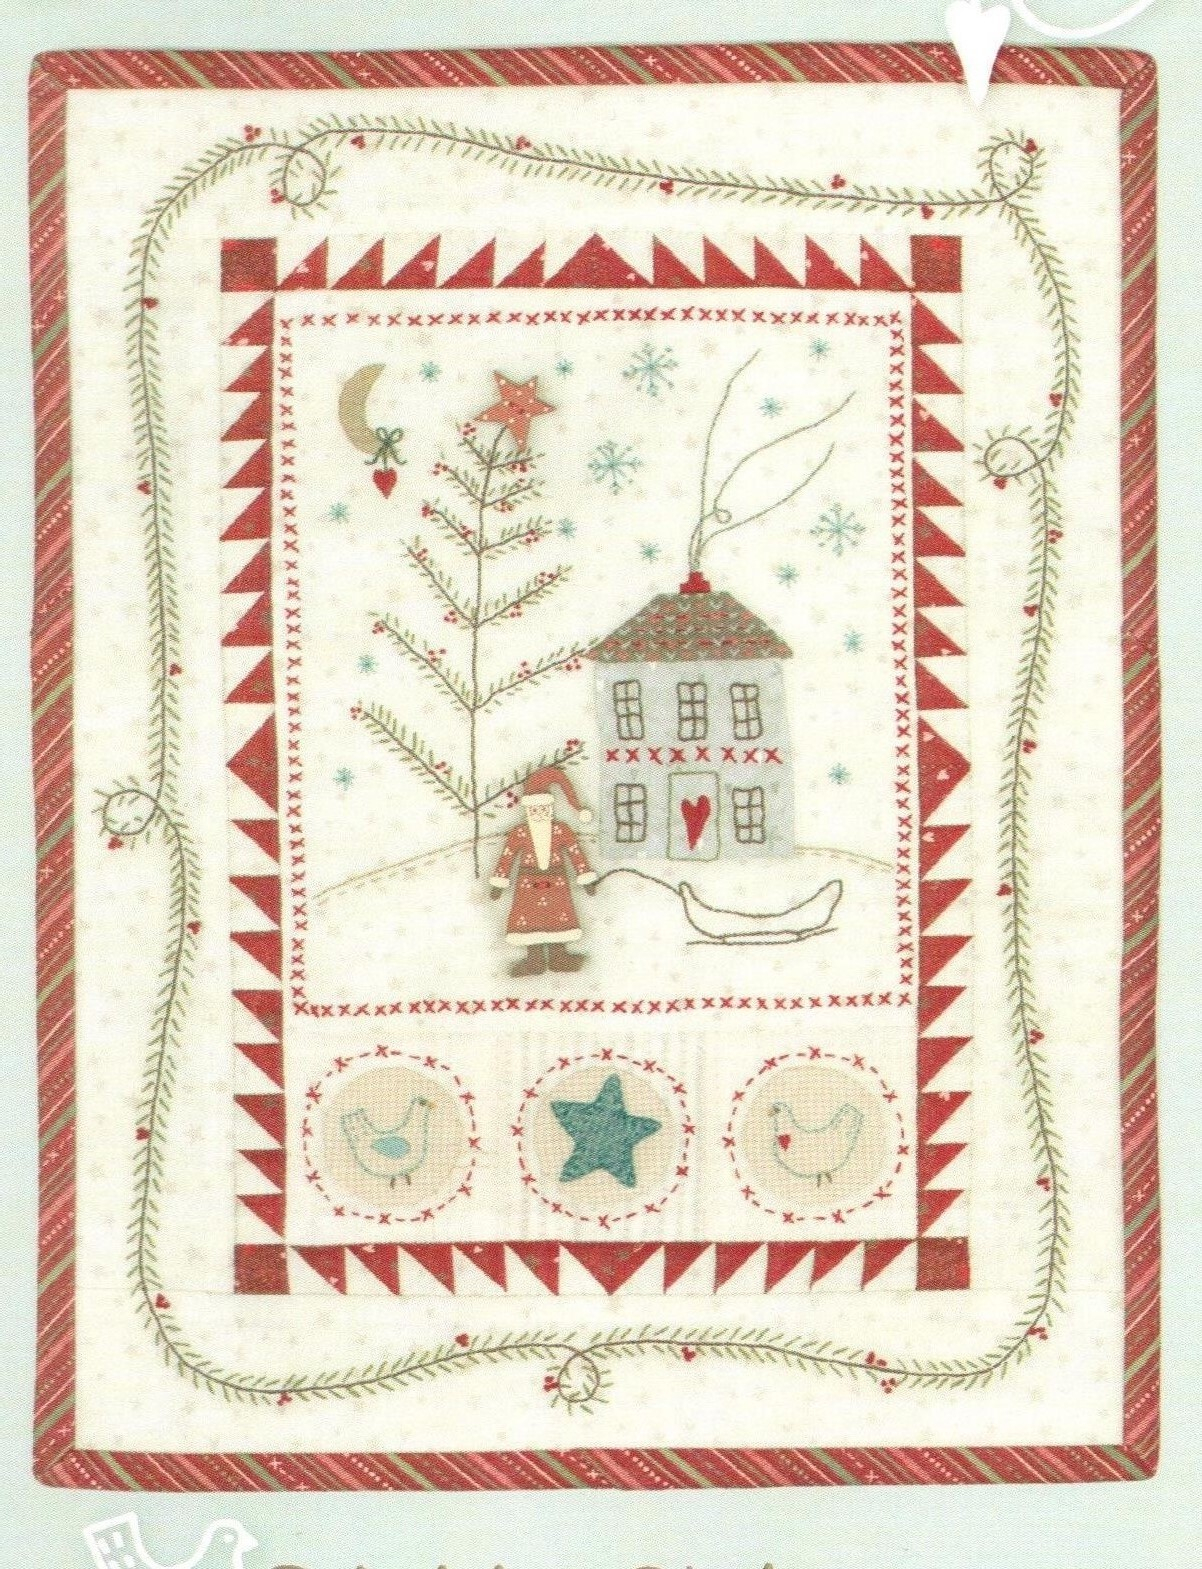 Hand Embroidery Quilt Patterns Primitive Christmas Quilt And Embroidery Pattern With Hand Painted Jolly Santa Button Pack